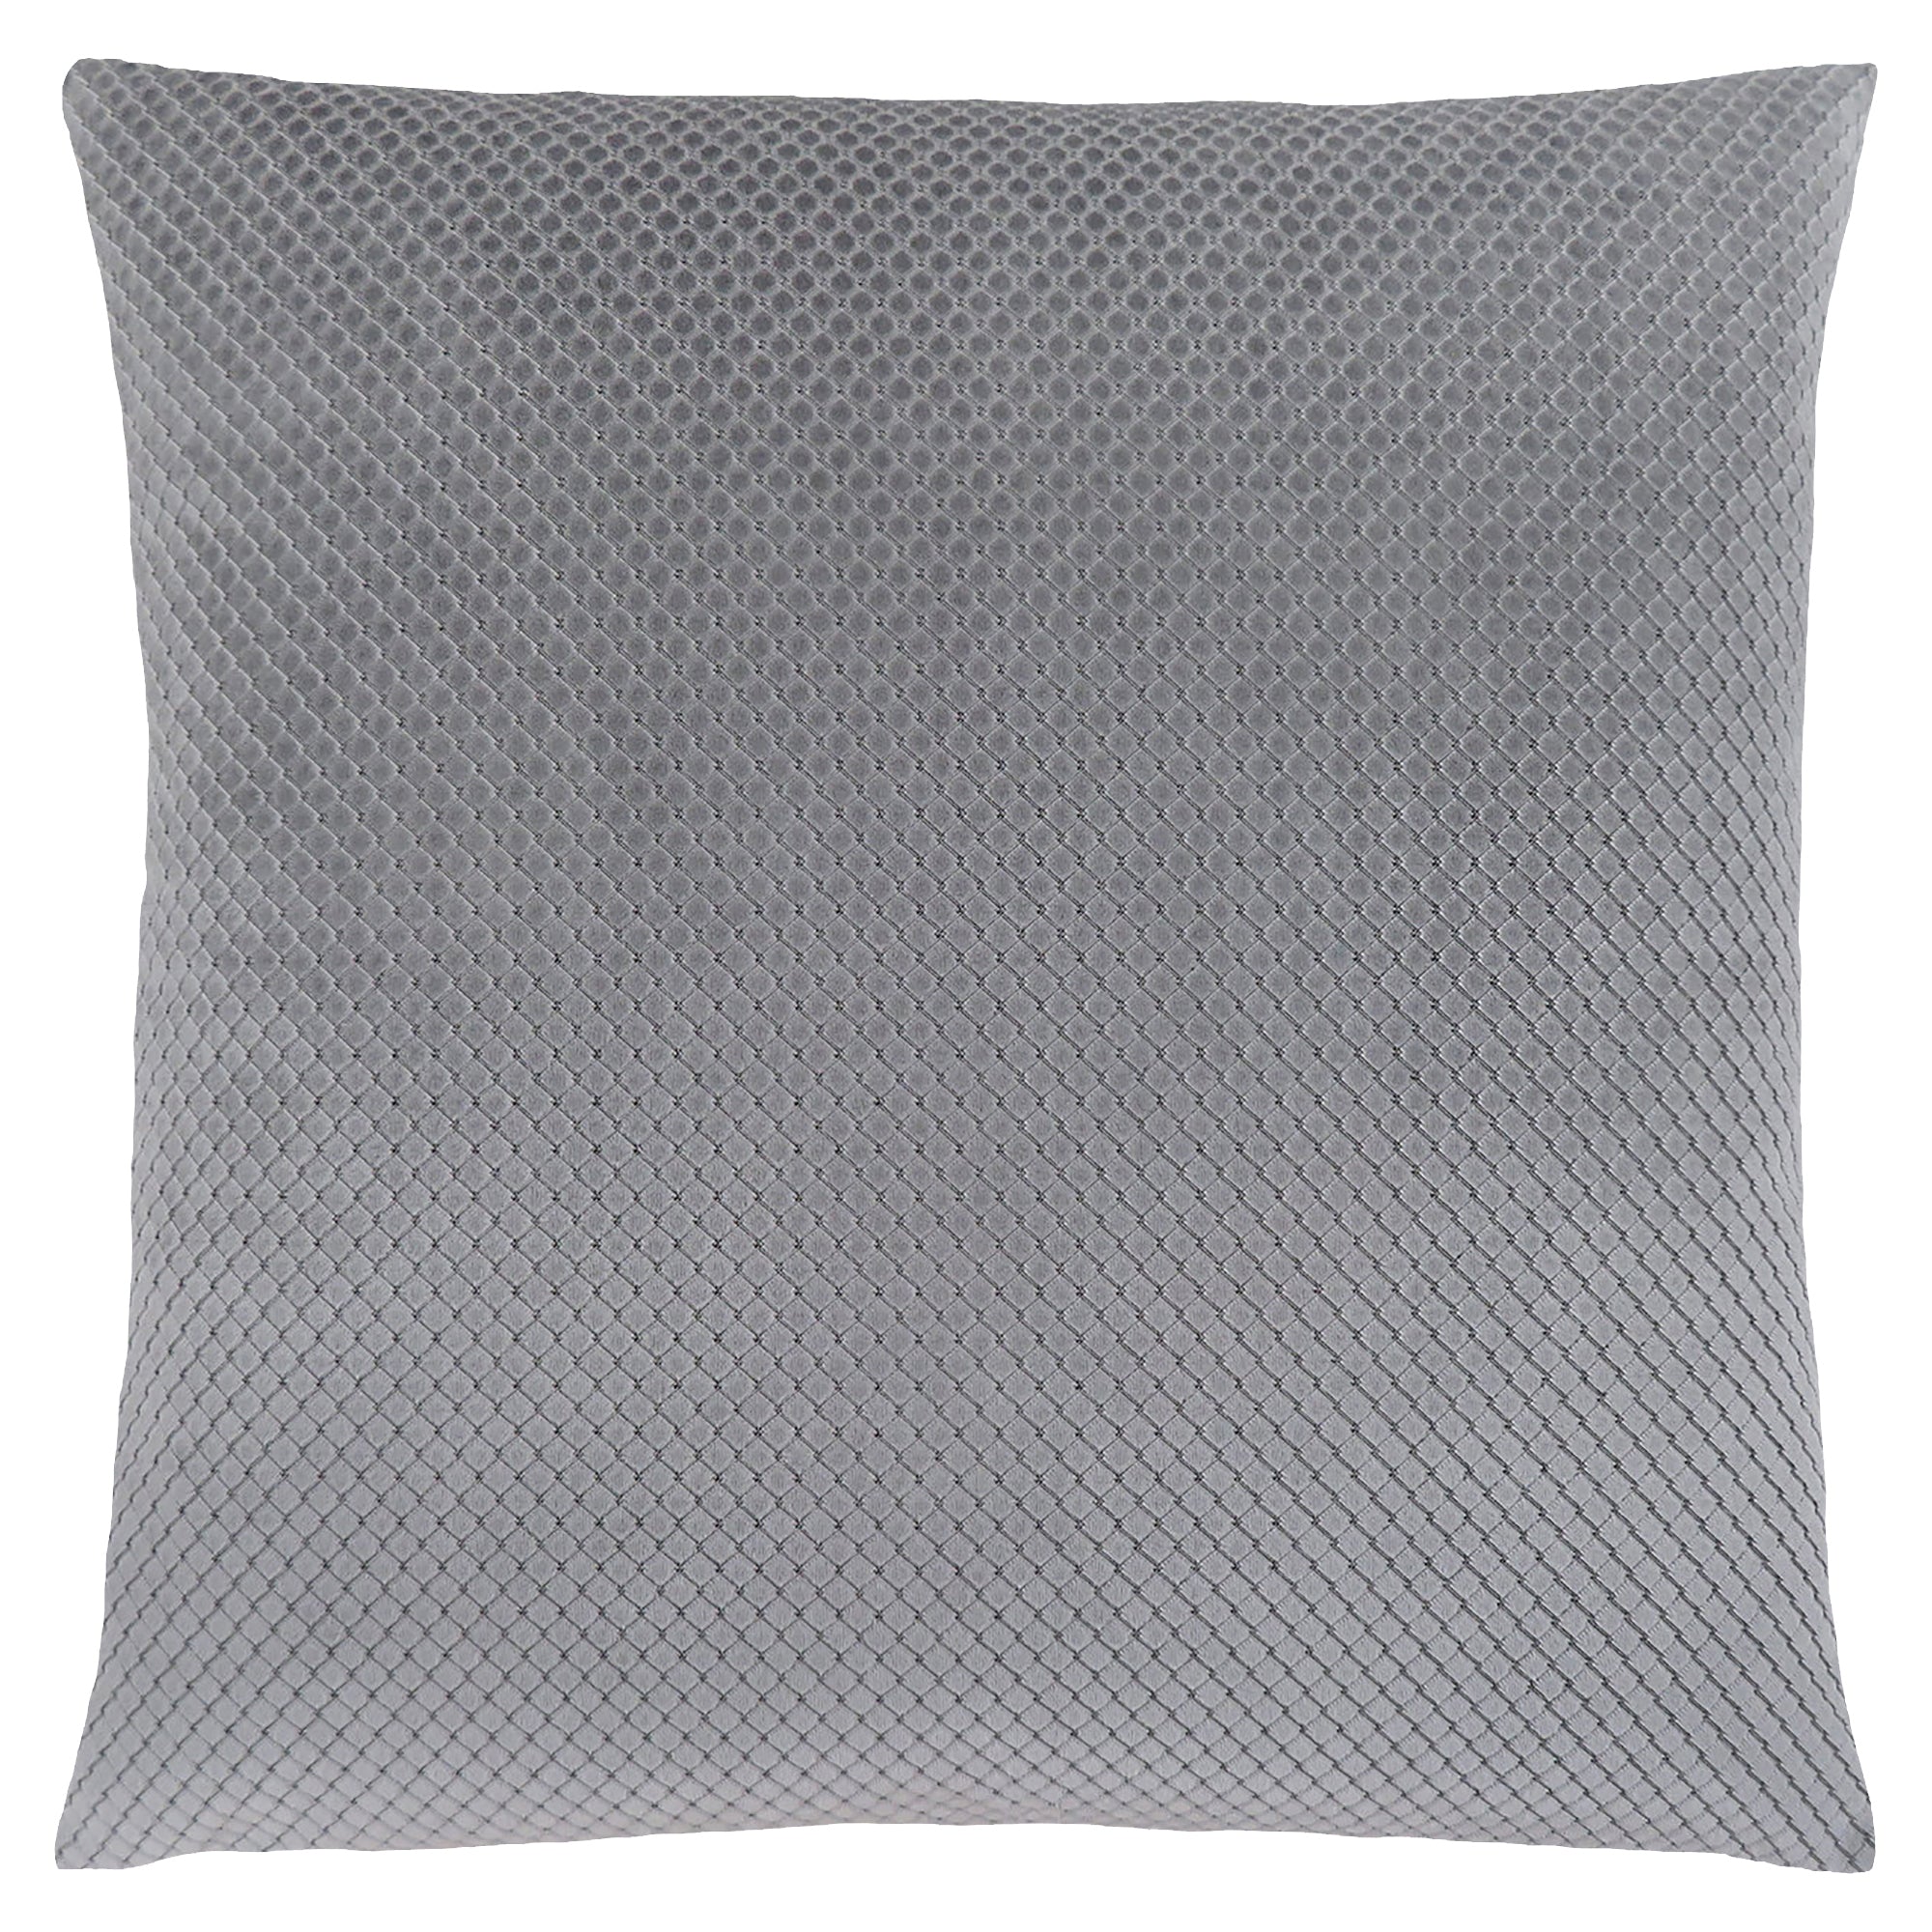 MN-919306    Pillows, 18 X 18 Square, Insert Included, Decorative Throw, Accent, Sofa, Couch, Bed, Velvety Soft Polyester Fabric, Hypoallergenic Soft Polyester Insert, Silver, Transitional